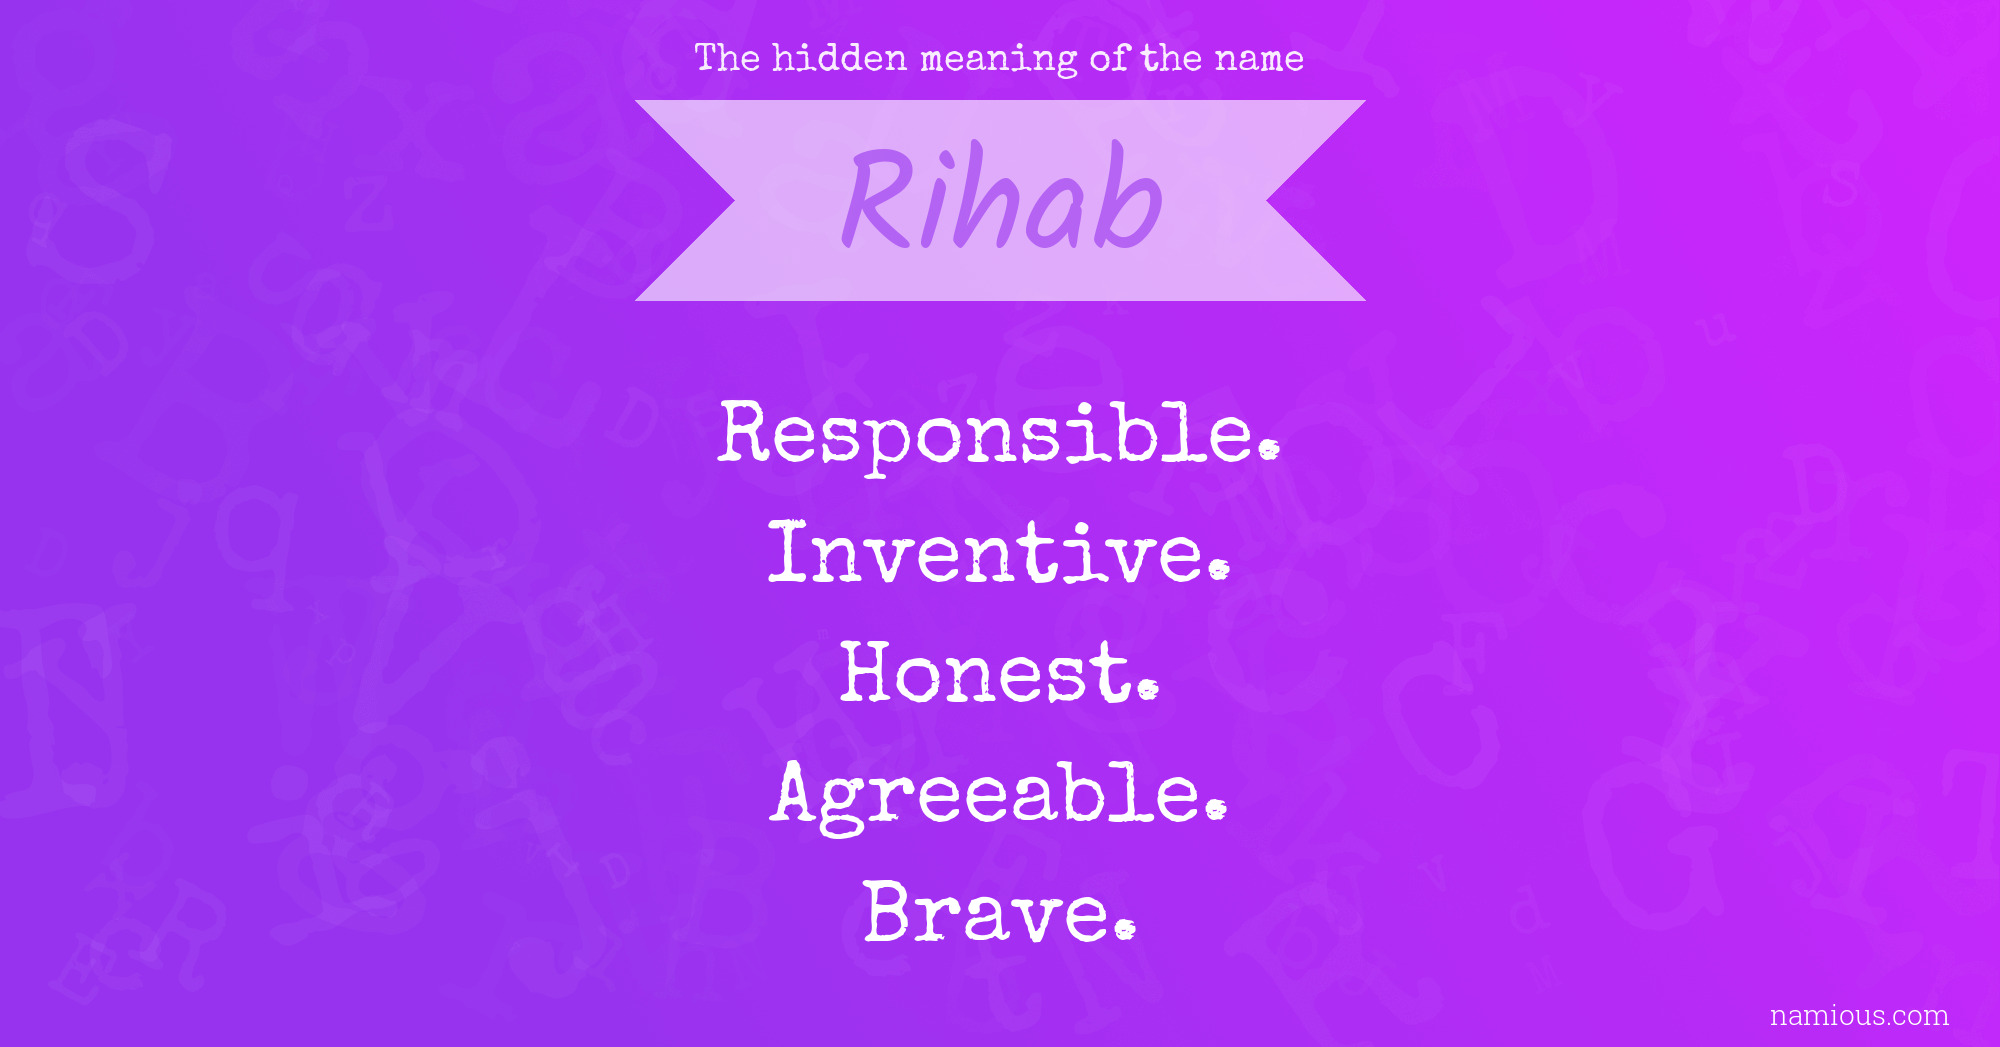 The hidden meaning of the name Rihab